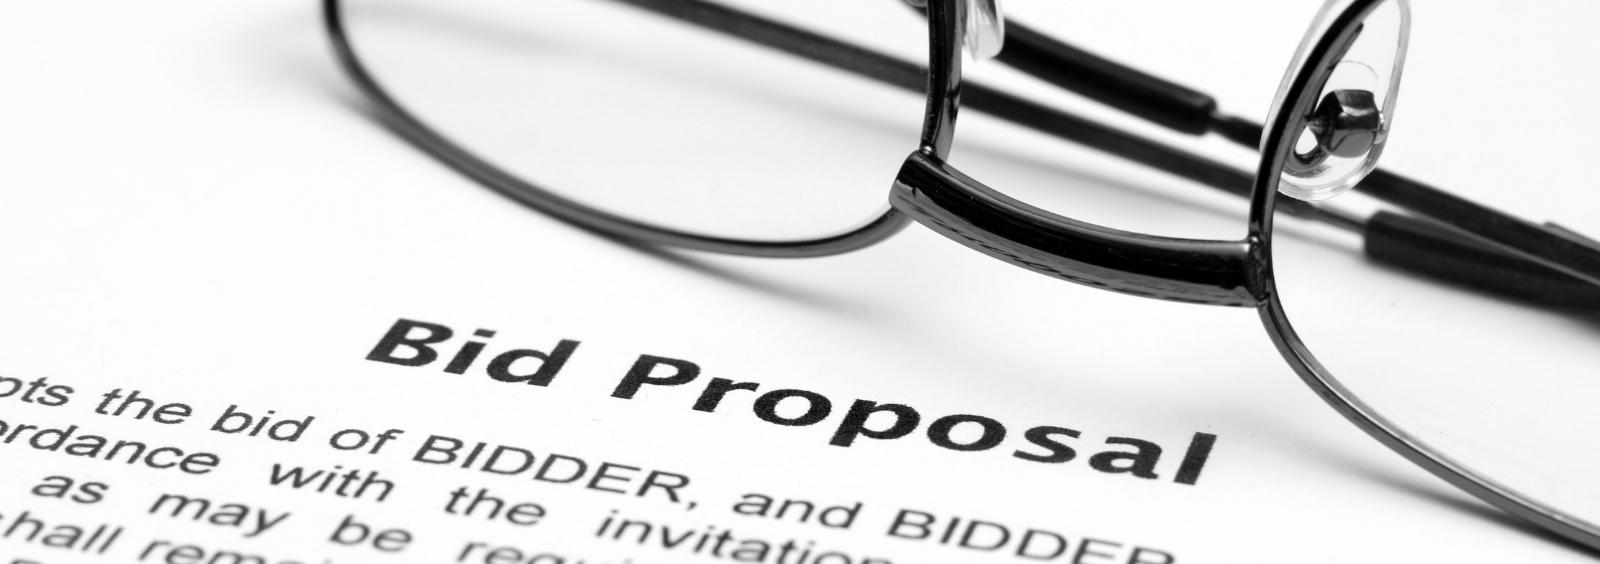 Bid proposal document with glasses on top.